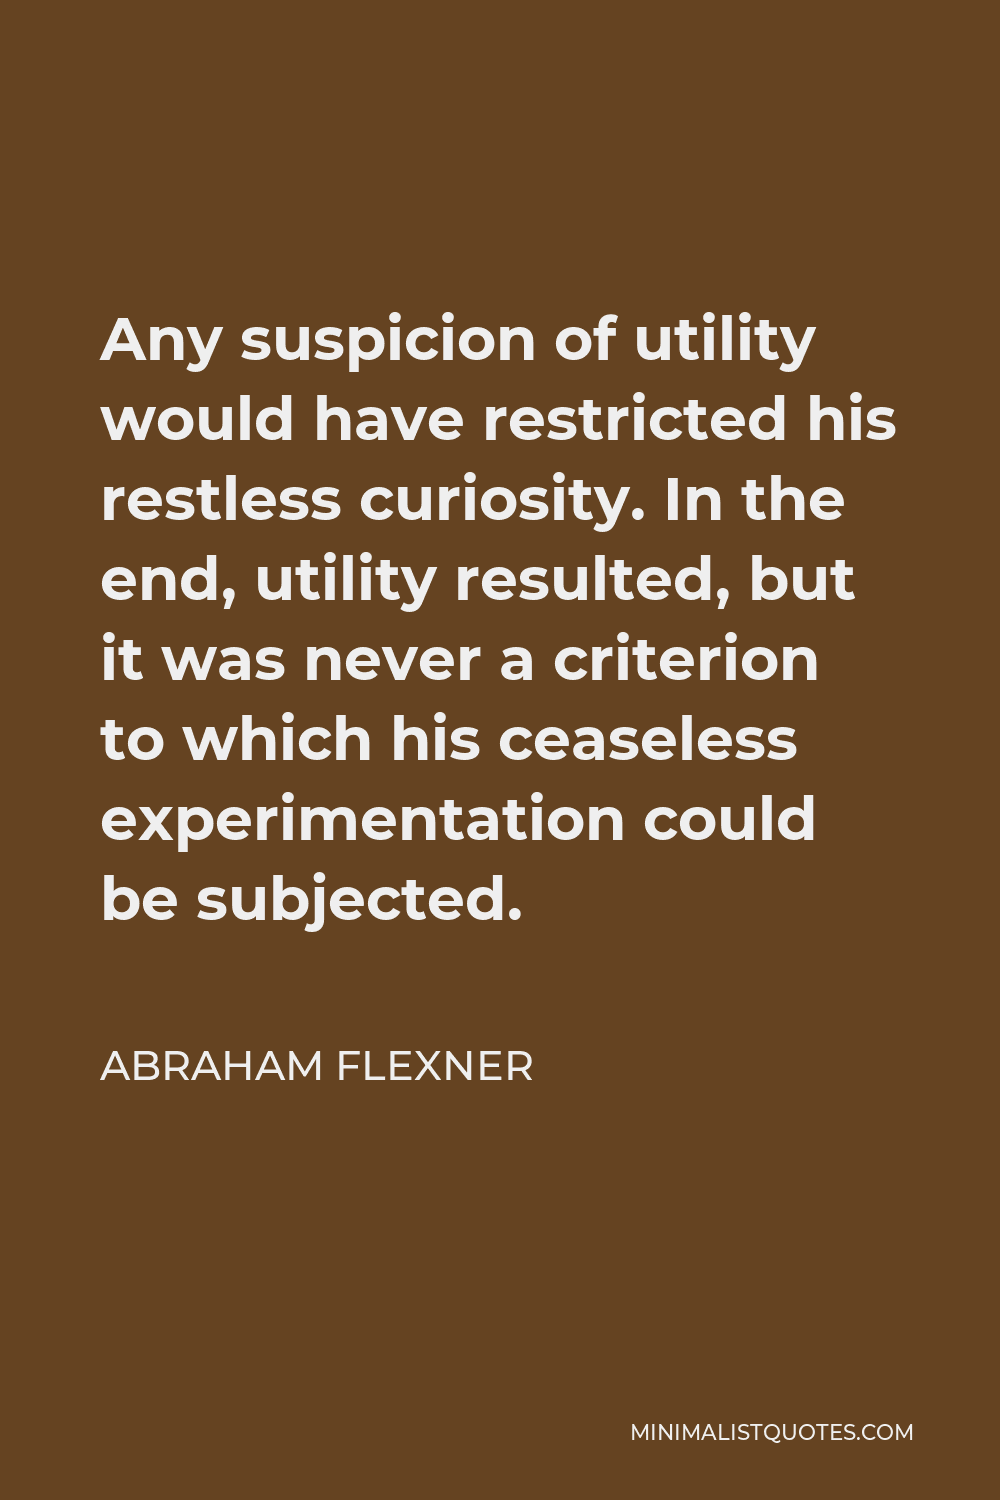 Abraham Flexner Quote - Any suspicion of utility would have restricted his restless curiosity. In the end, utility resulted, but it was never a criterion to which his ceaseless experimentation could be subjected.